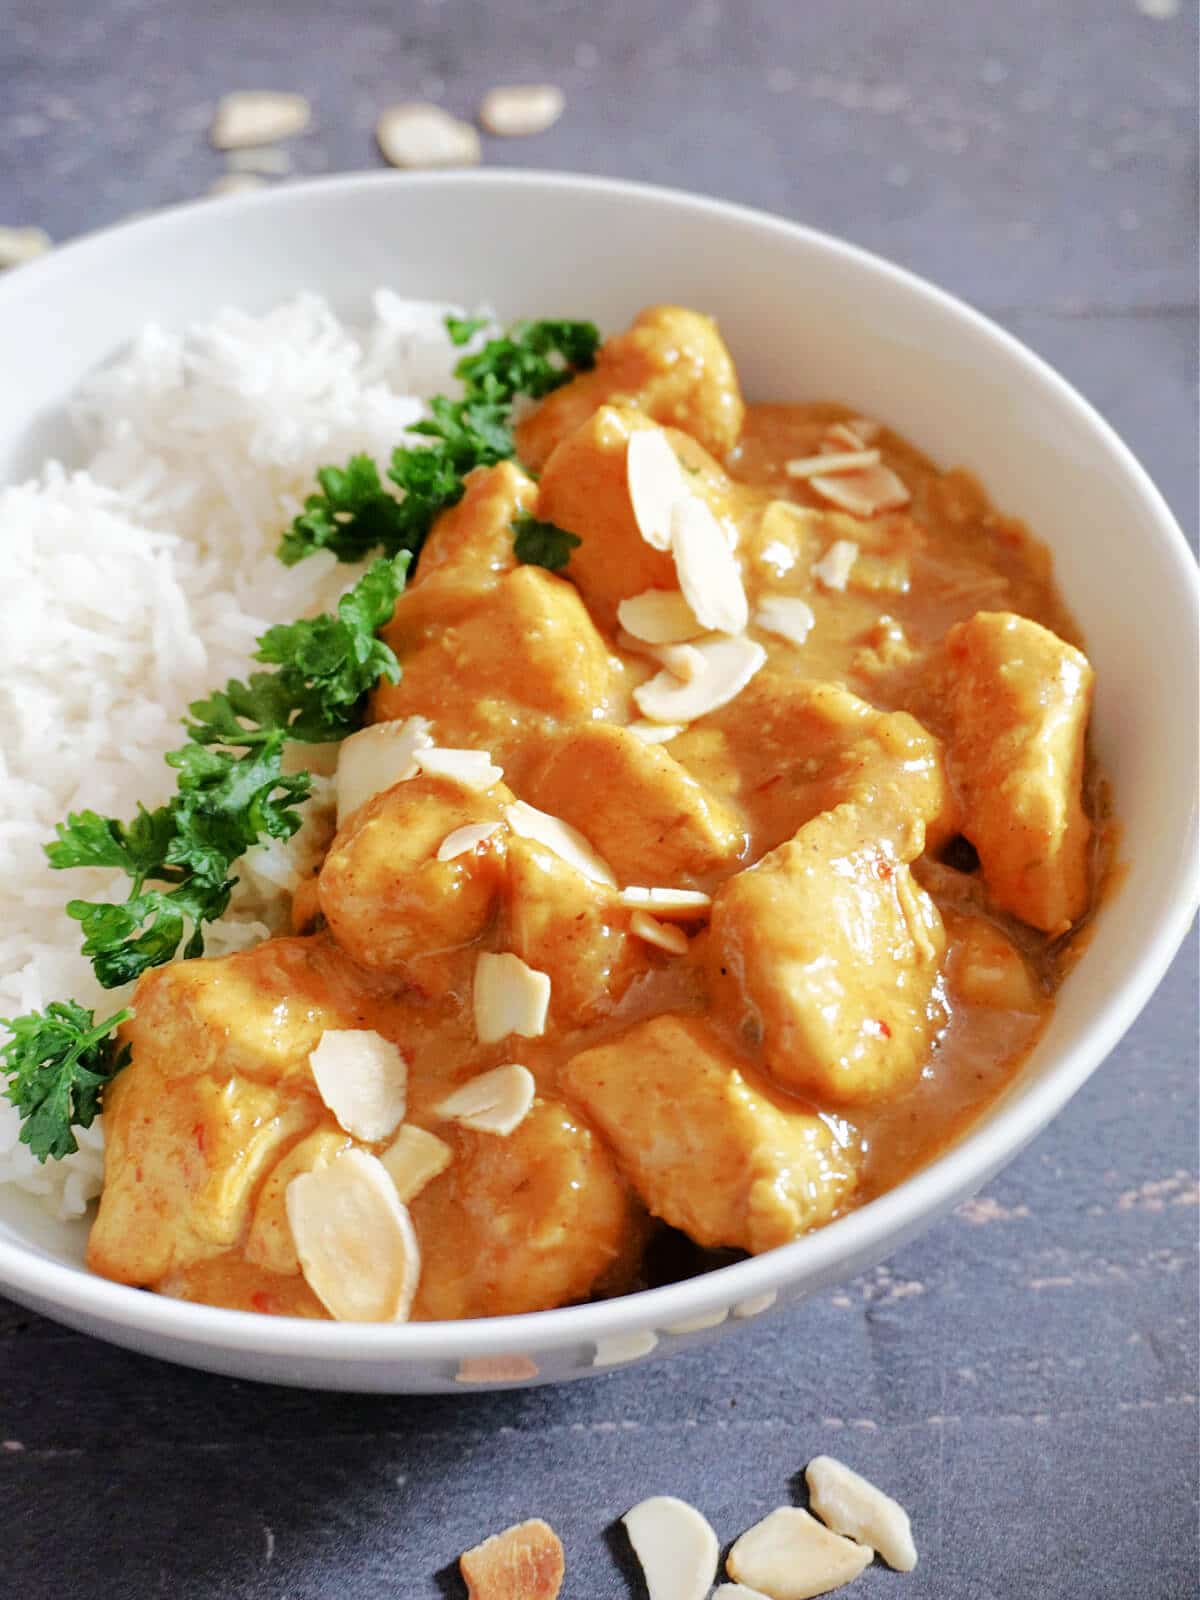 A white bowl with rice and chicken korma, garnished with parsley and almonds.